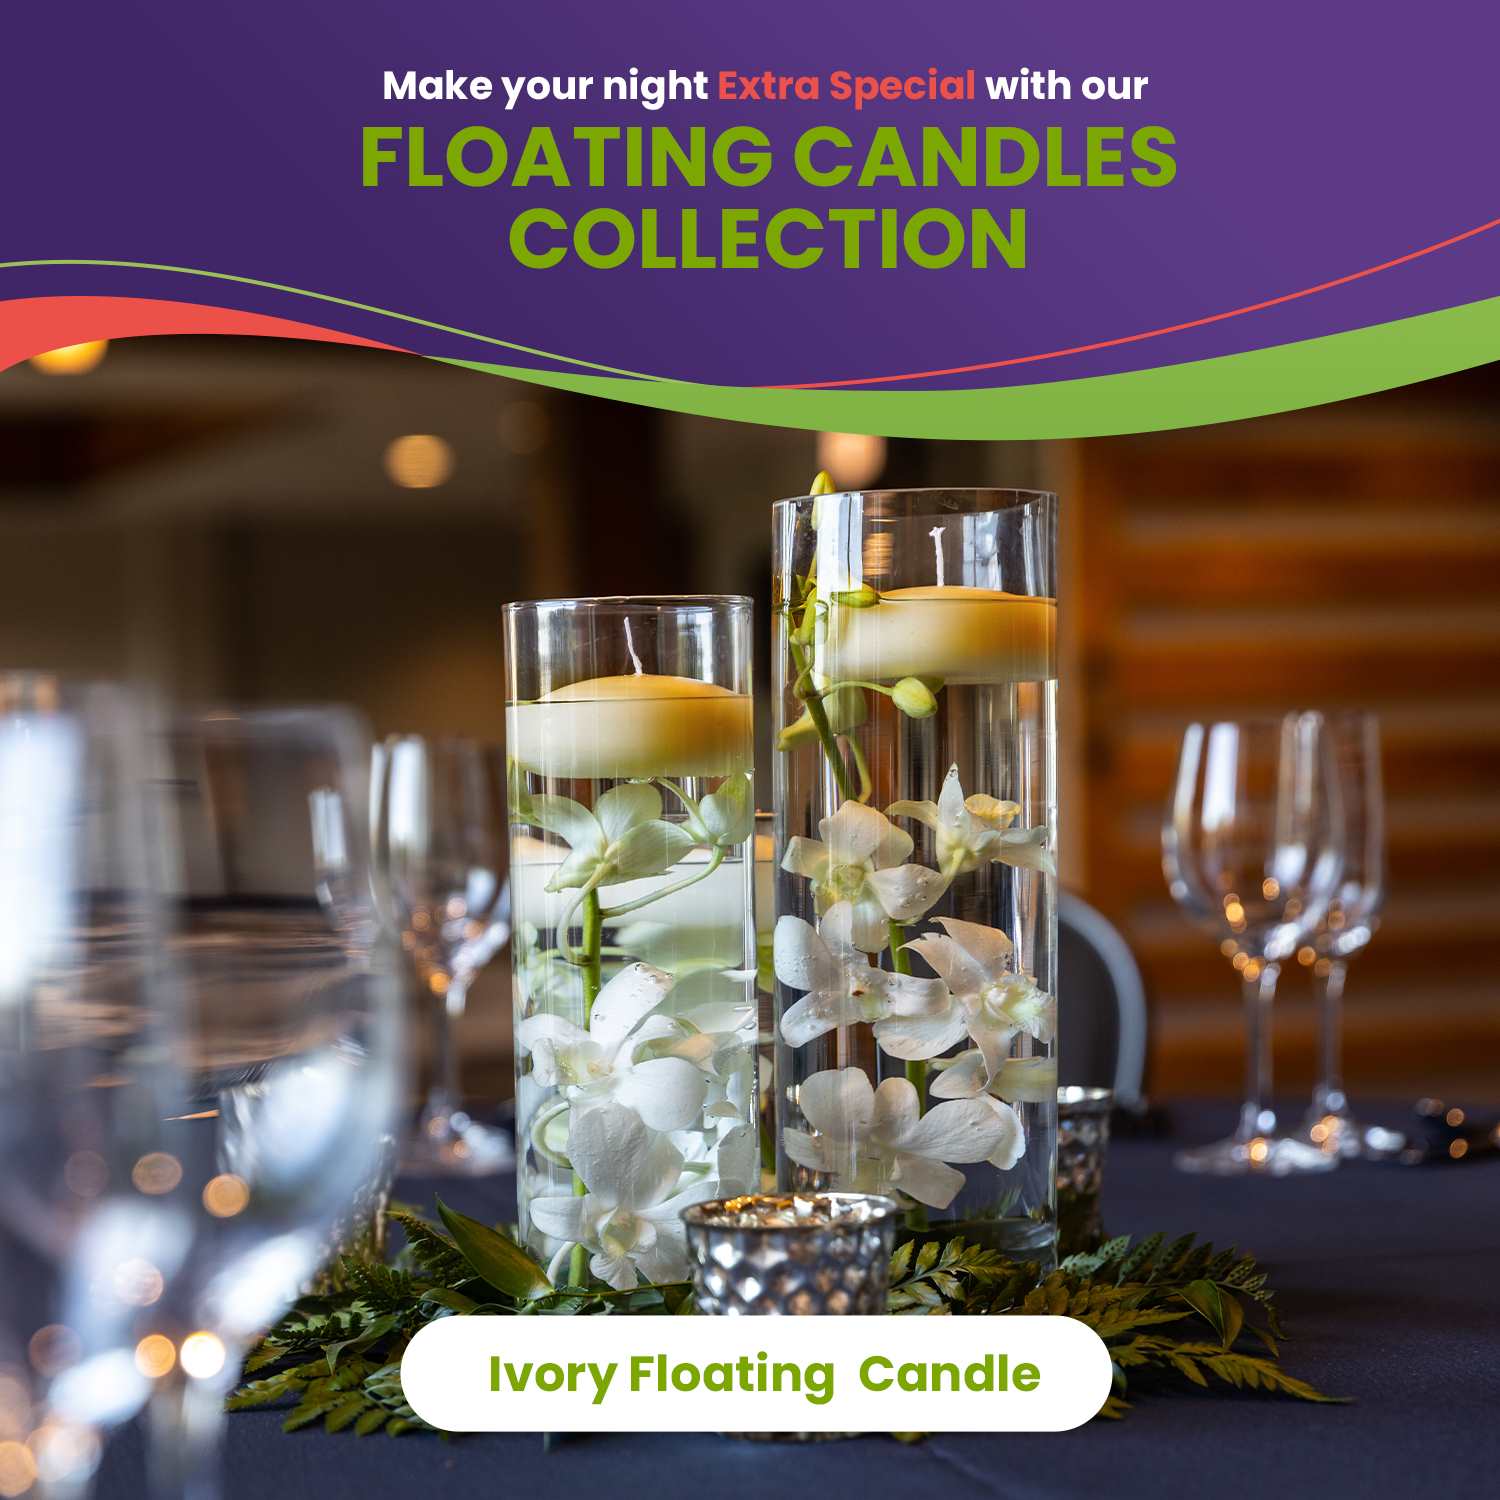 Ivory Floating Candles - 16-Pack - 8 hours Burn Time